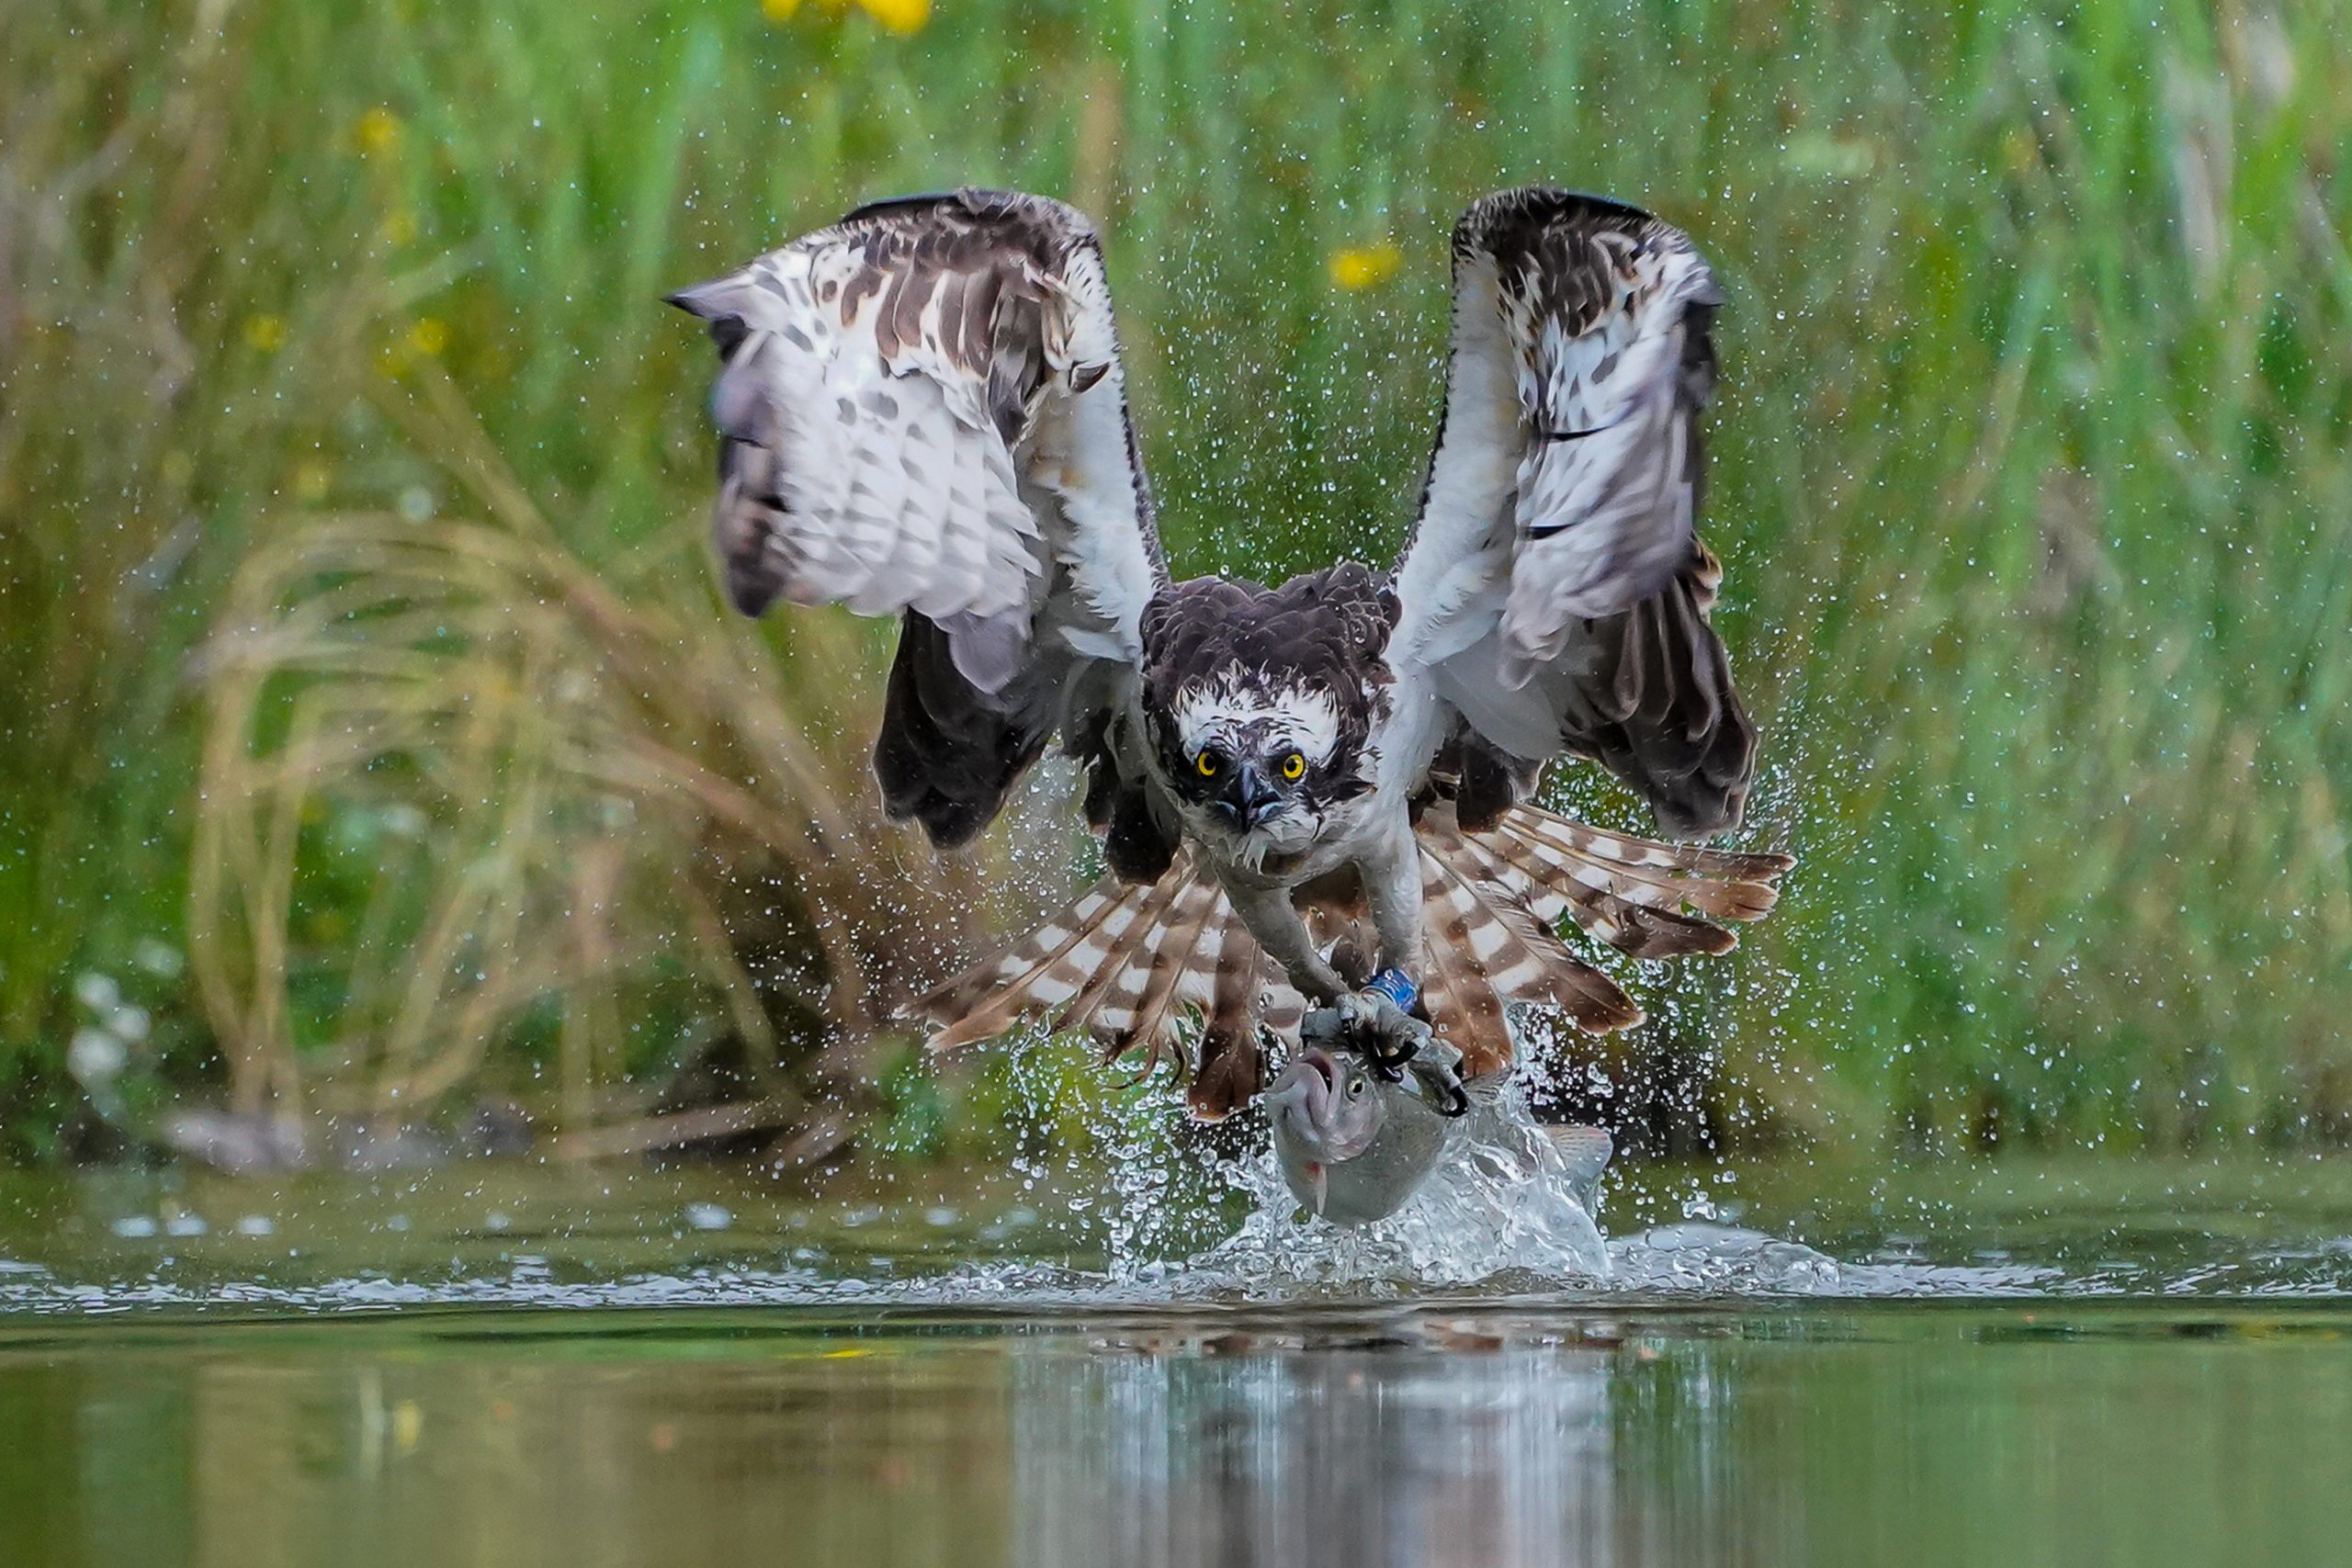 Hooked: The osprey took off with its breakfast.